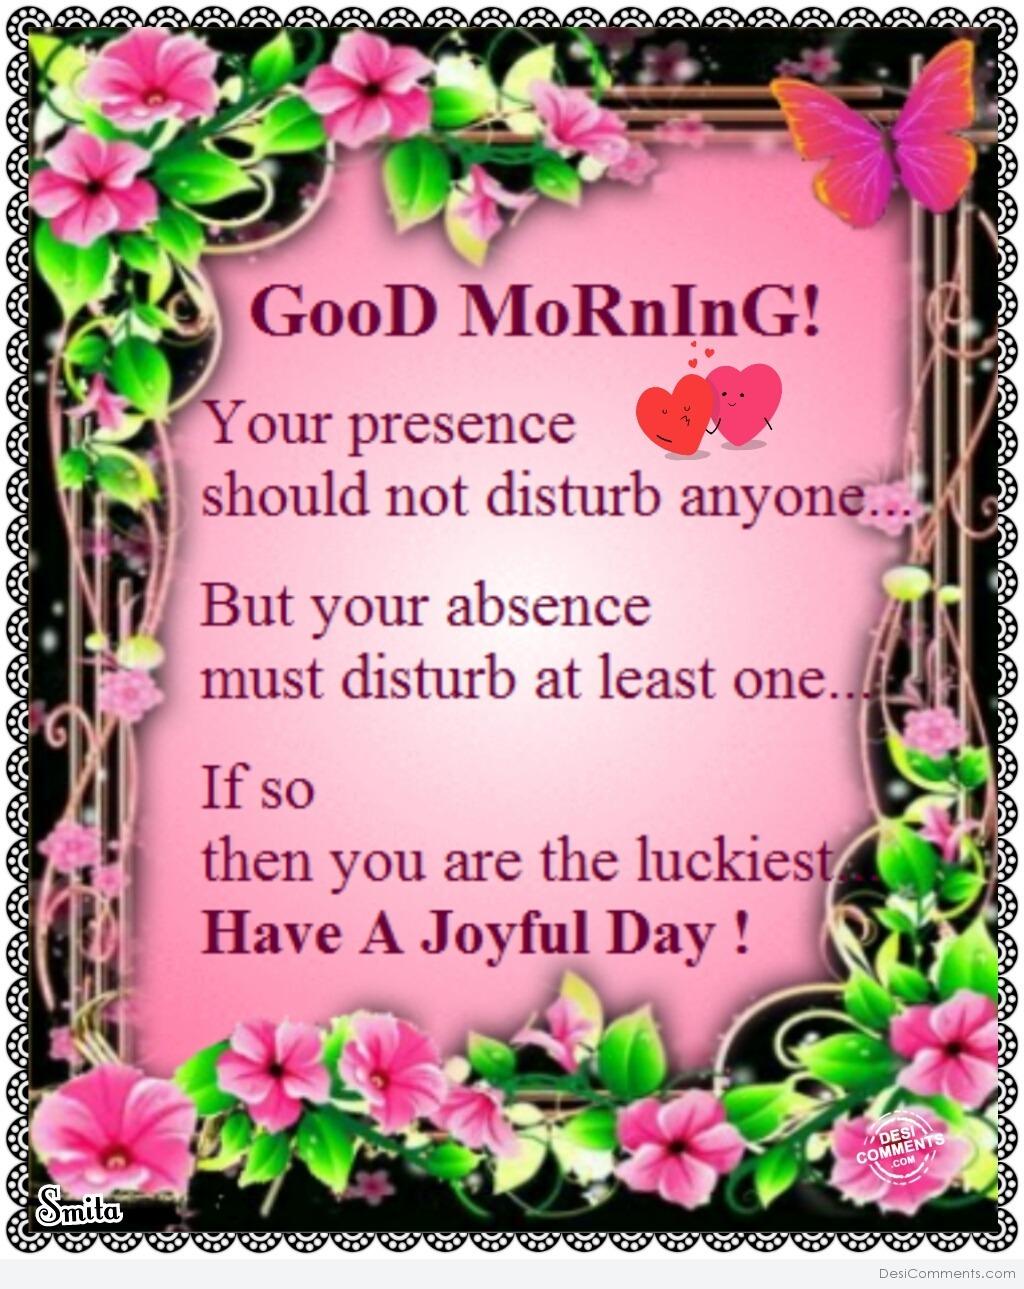 GooD MoRnInG – Have a joyful day - DesiComments.com